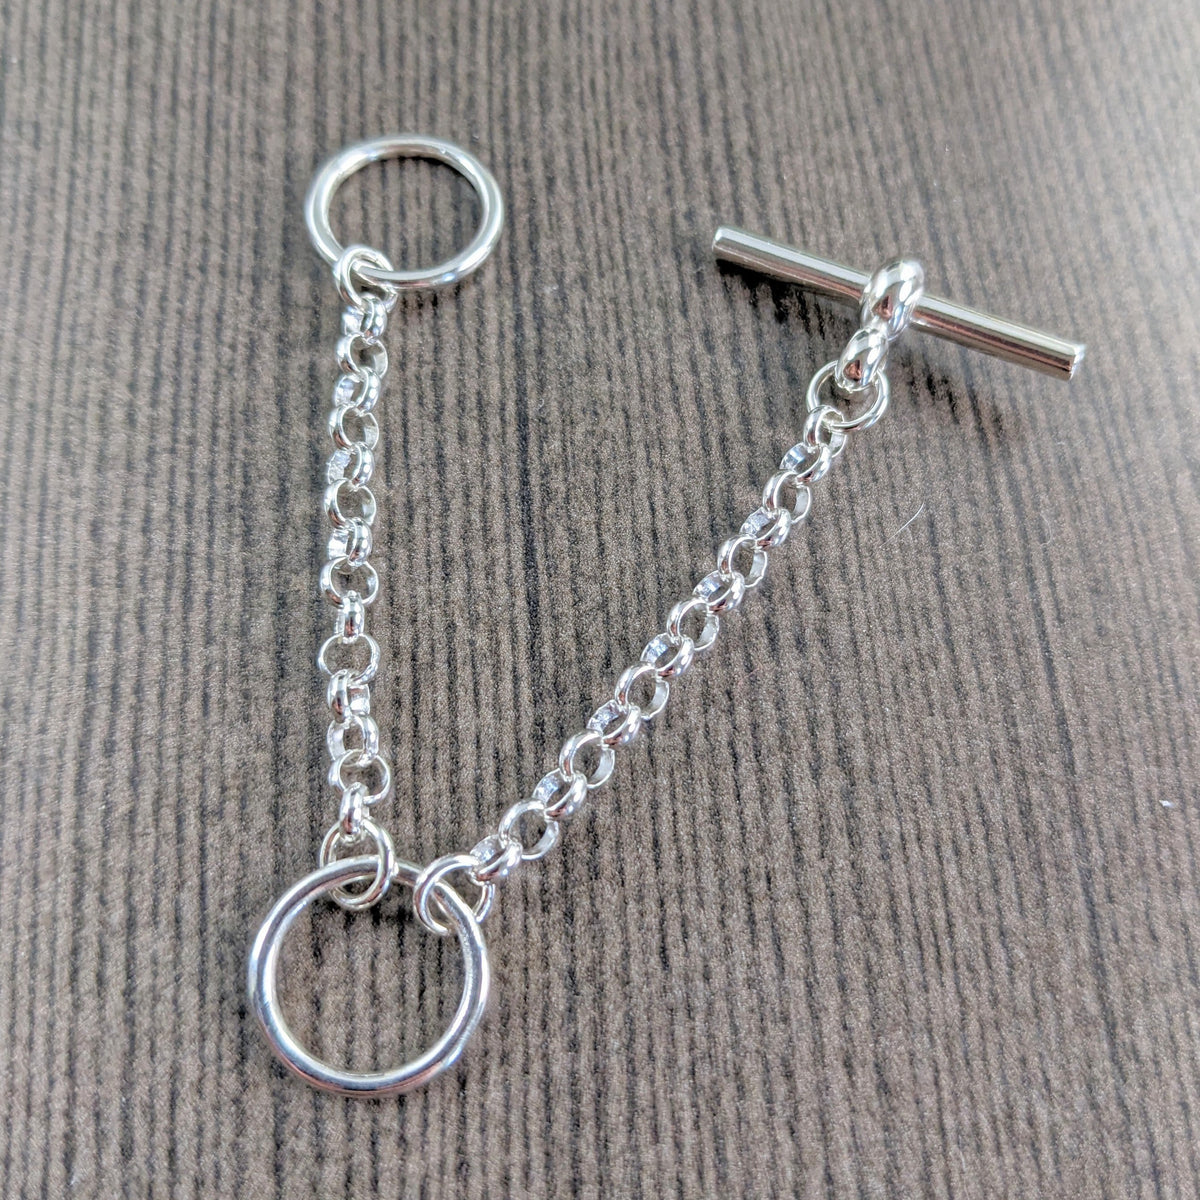 Removable Chain Extender - Everly Made